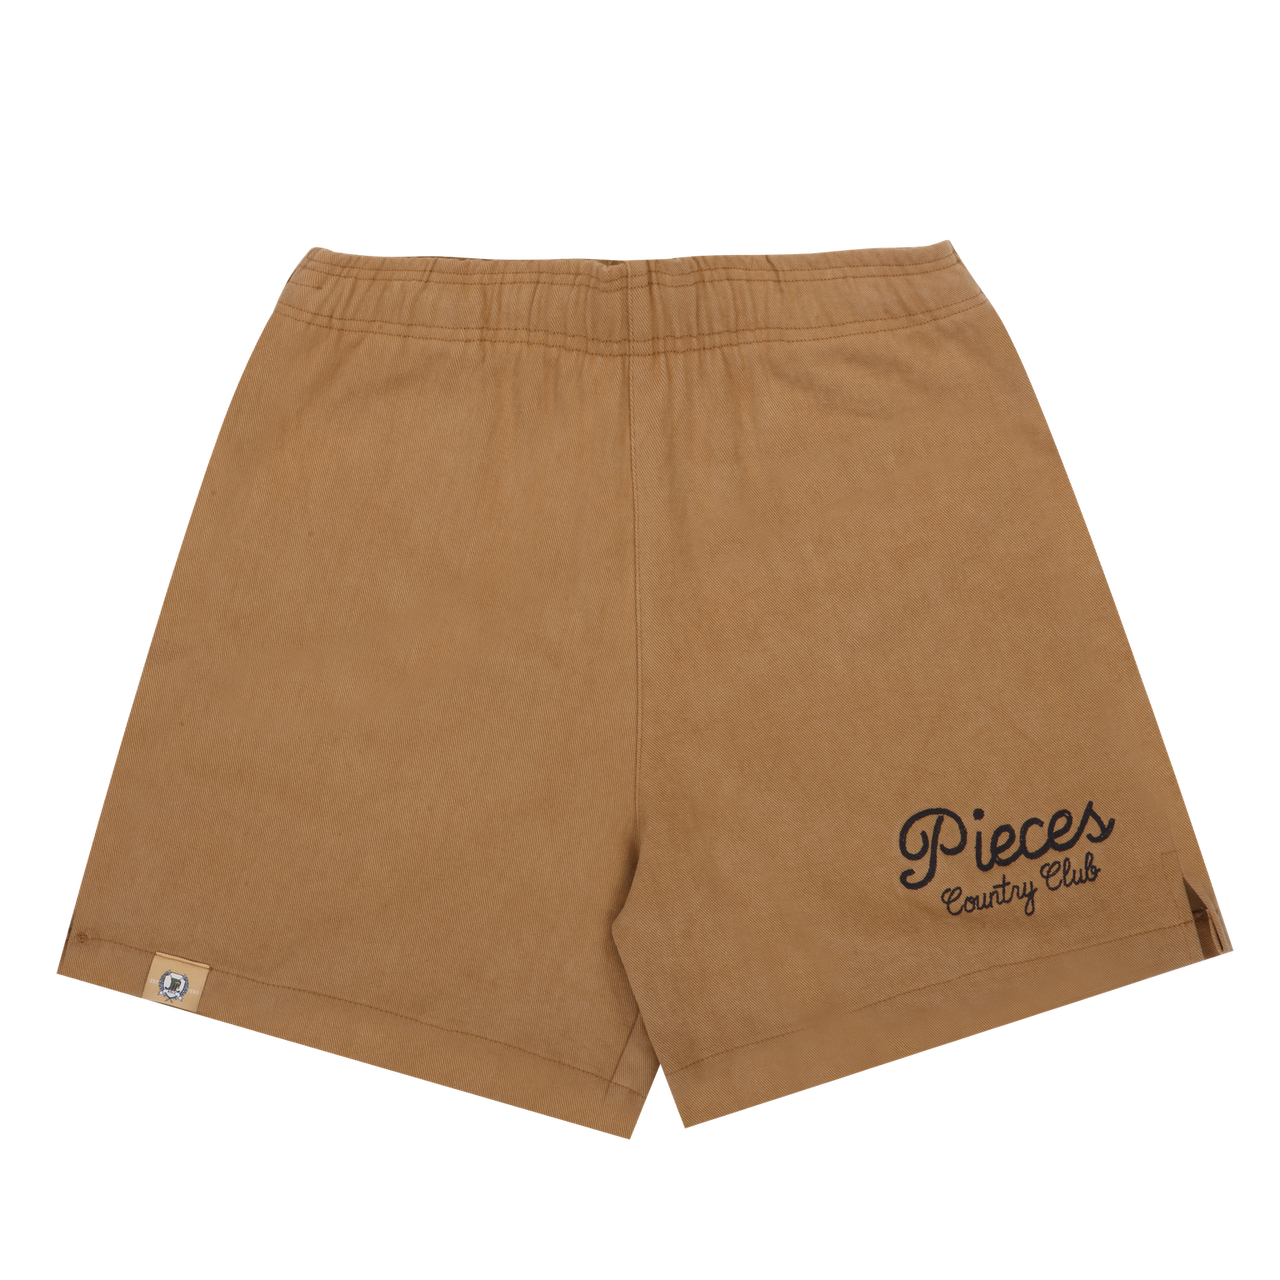 Pieces Country Club Shorts Camel